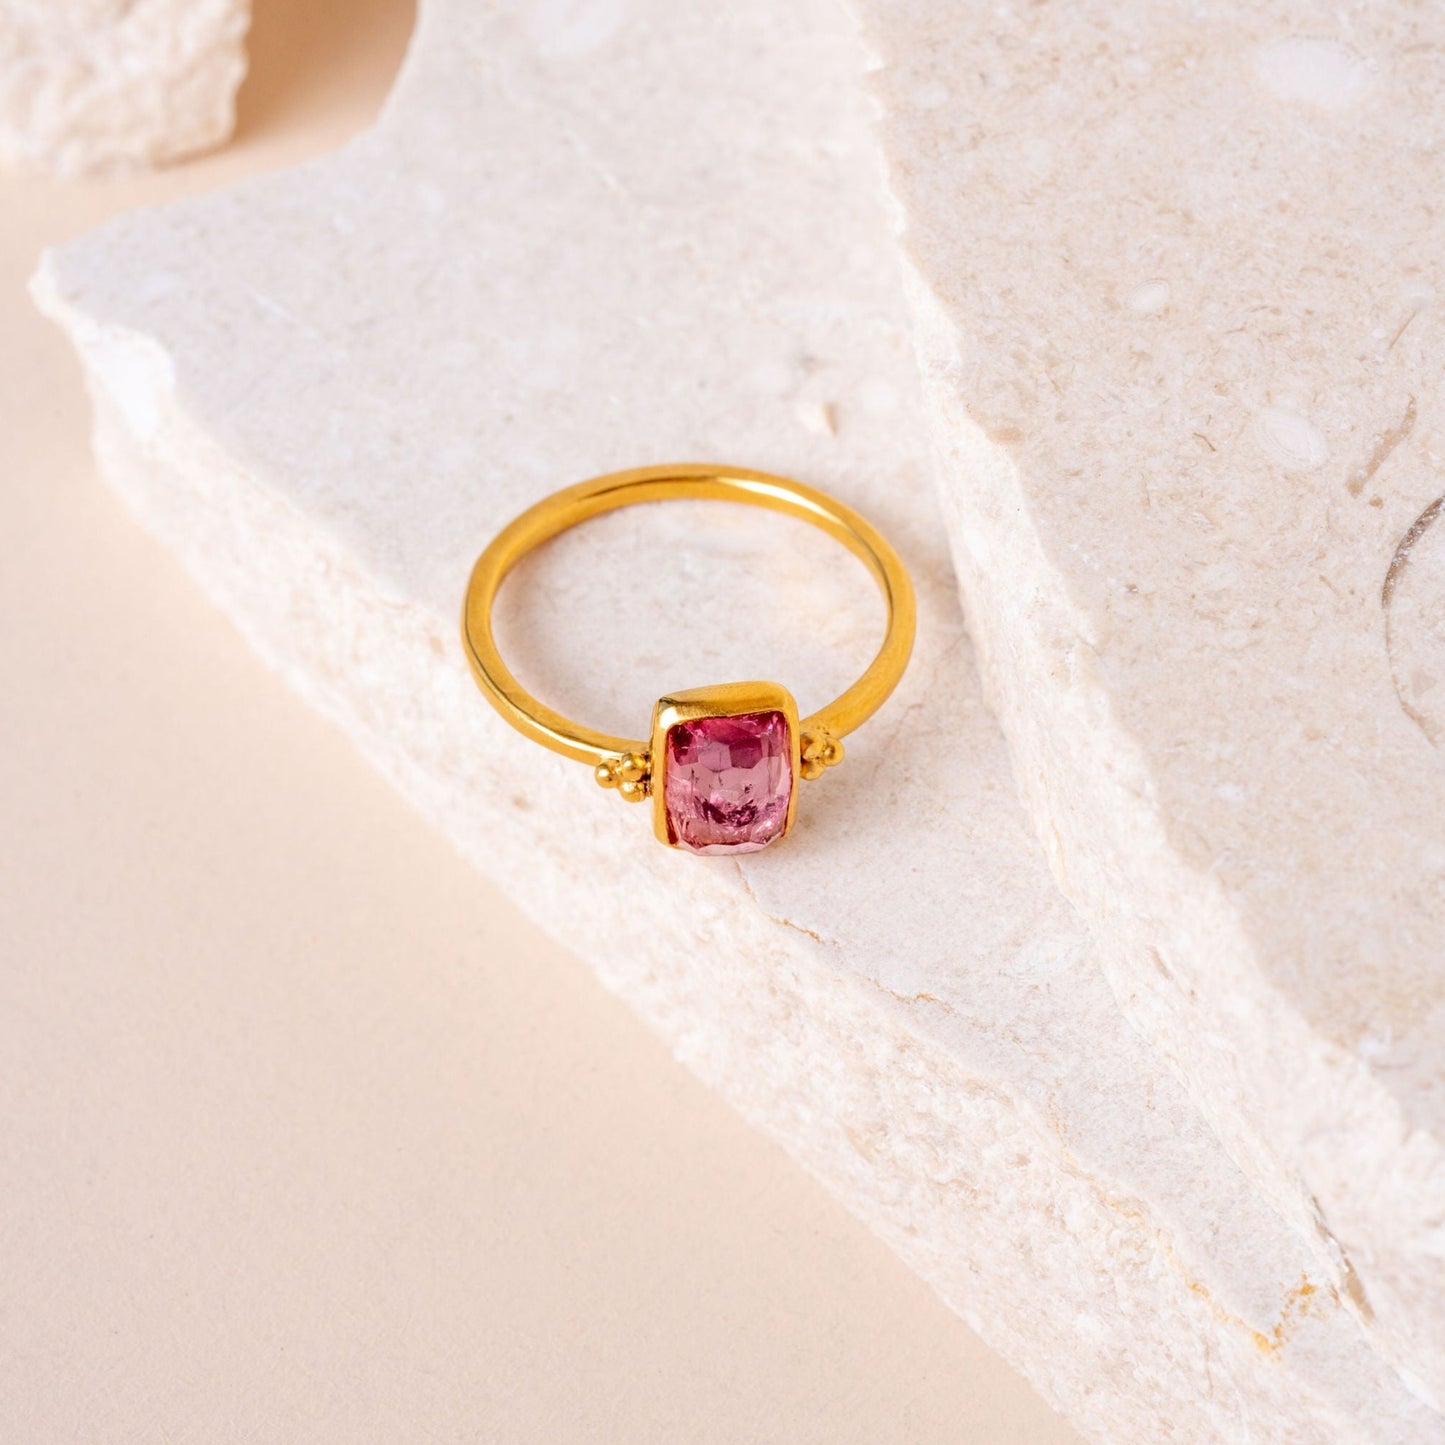 Handcrafted gold vermeil ring with meticulous granulation details framing a stunning hand-cut pink tourmaline